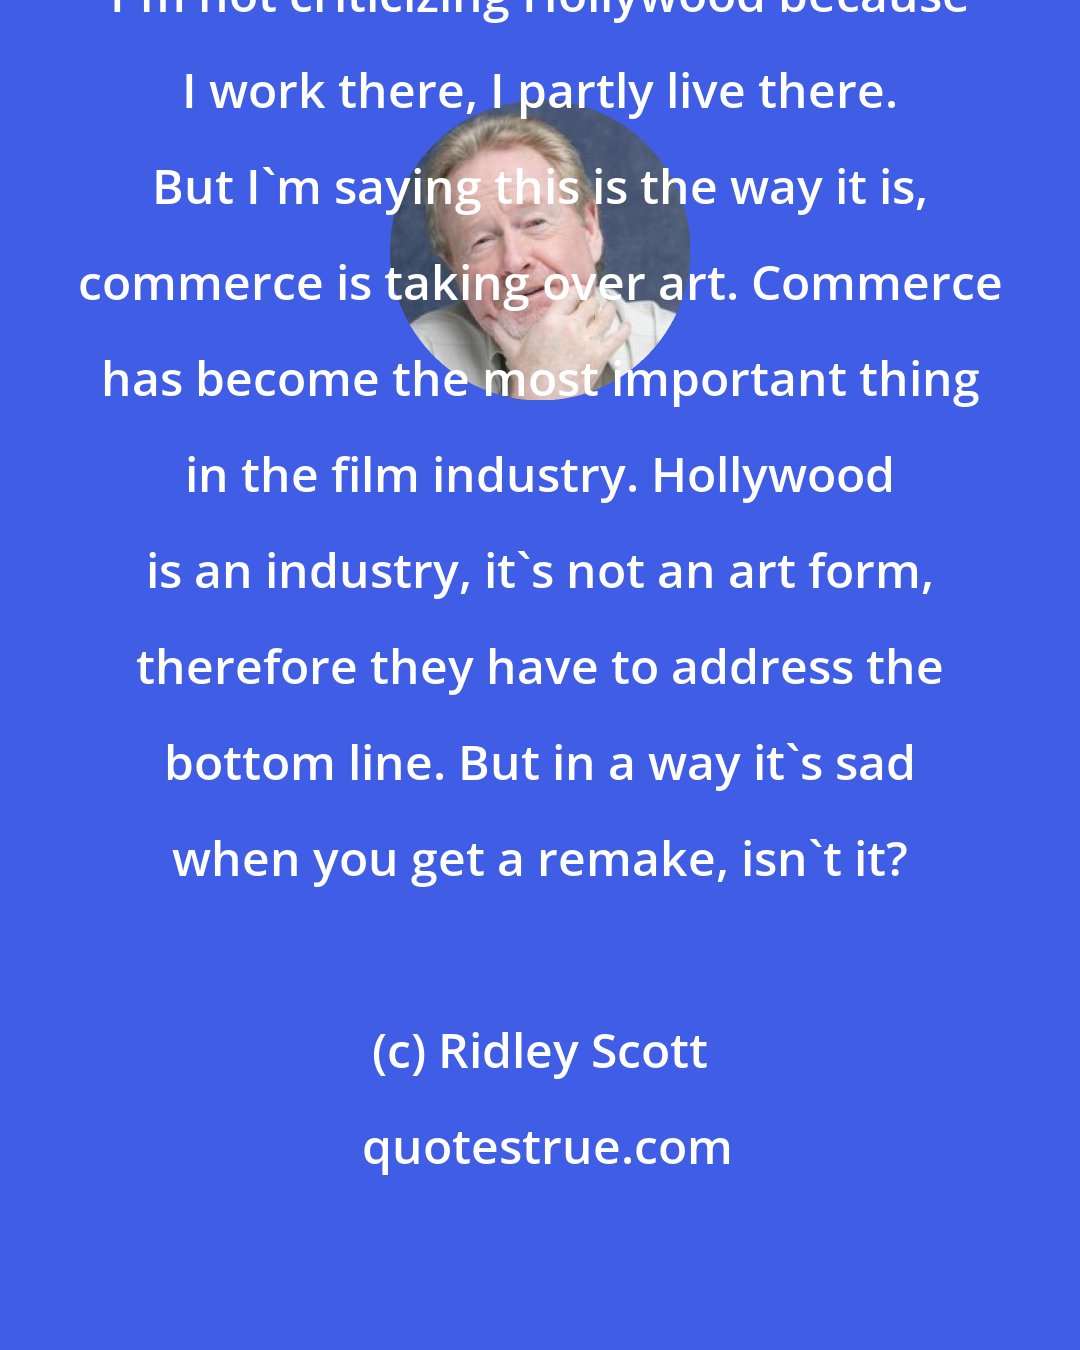 Ridley Scott: I'm not criticizing Hollywood because I work there, I partly live there. But I'm saying this is the way it is, commerce is taking over art. Commerce has become the most important thing in the film industry. Hollywood is an industry, it's not an art form, therefore they have to address the bottom line. But in a way it's sad when you get a remake, isn't it?